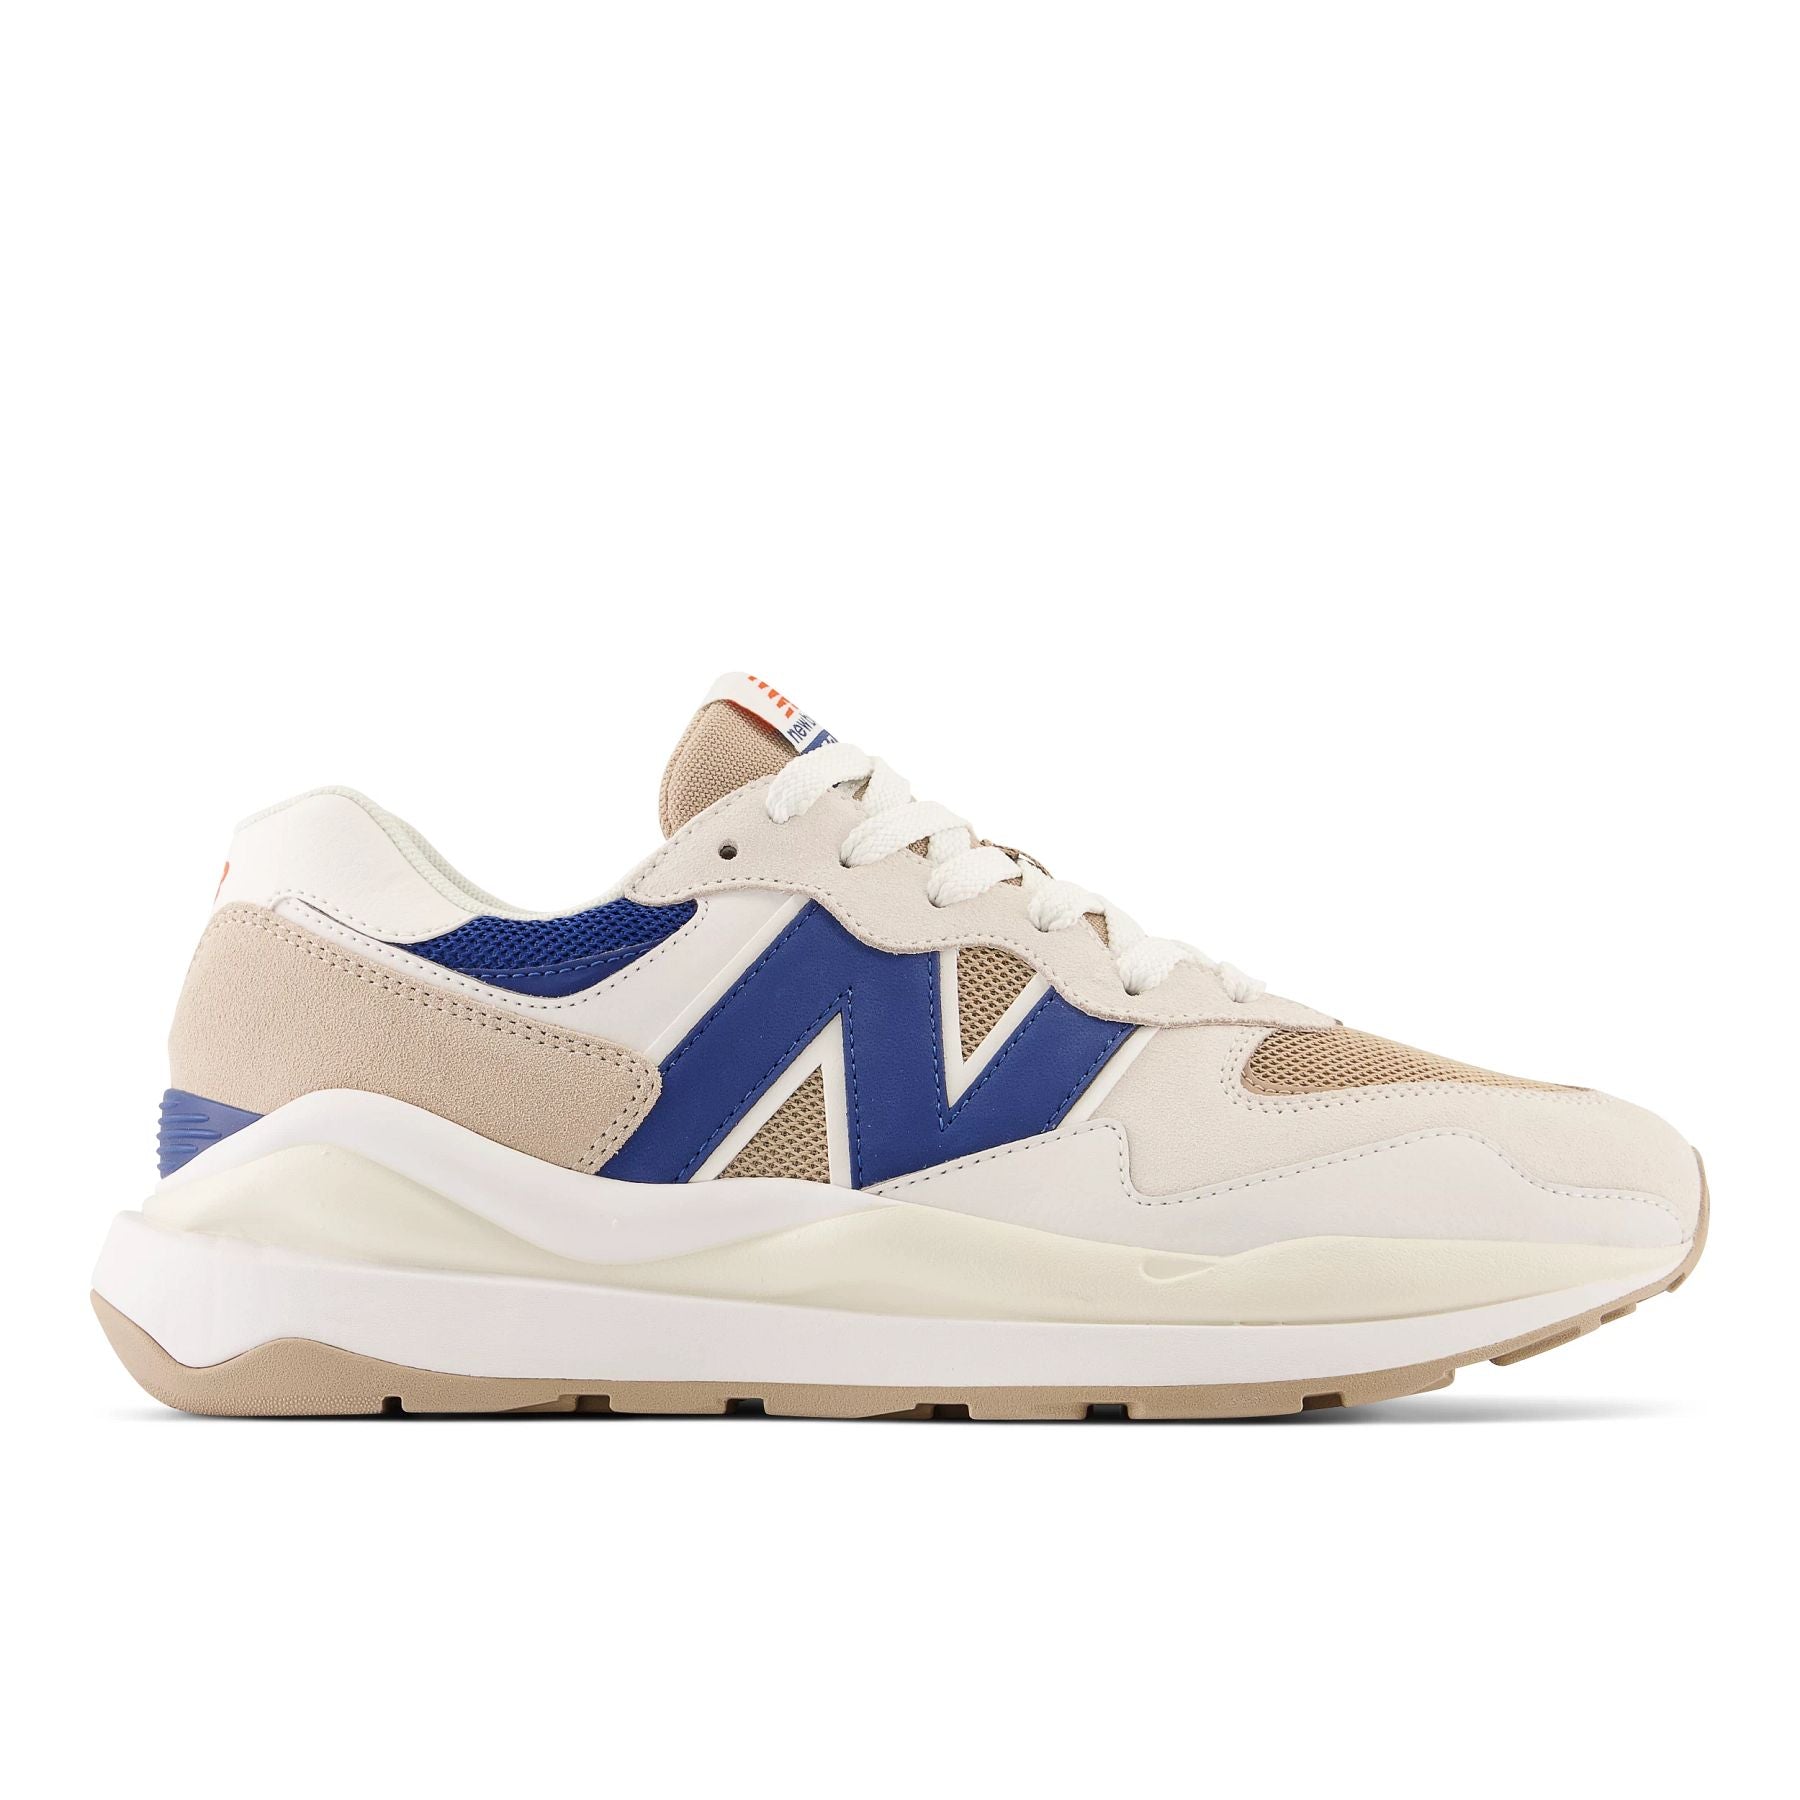 Lateral view of the Men's New Balance lifestyle 5740 shoe in the color Sea Salt